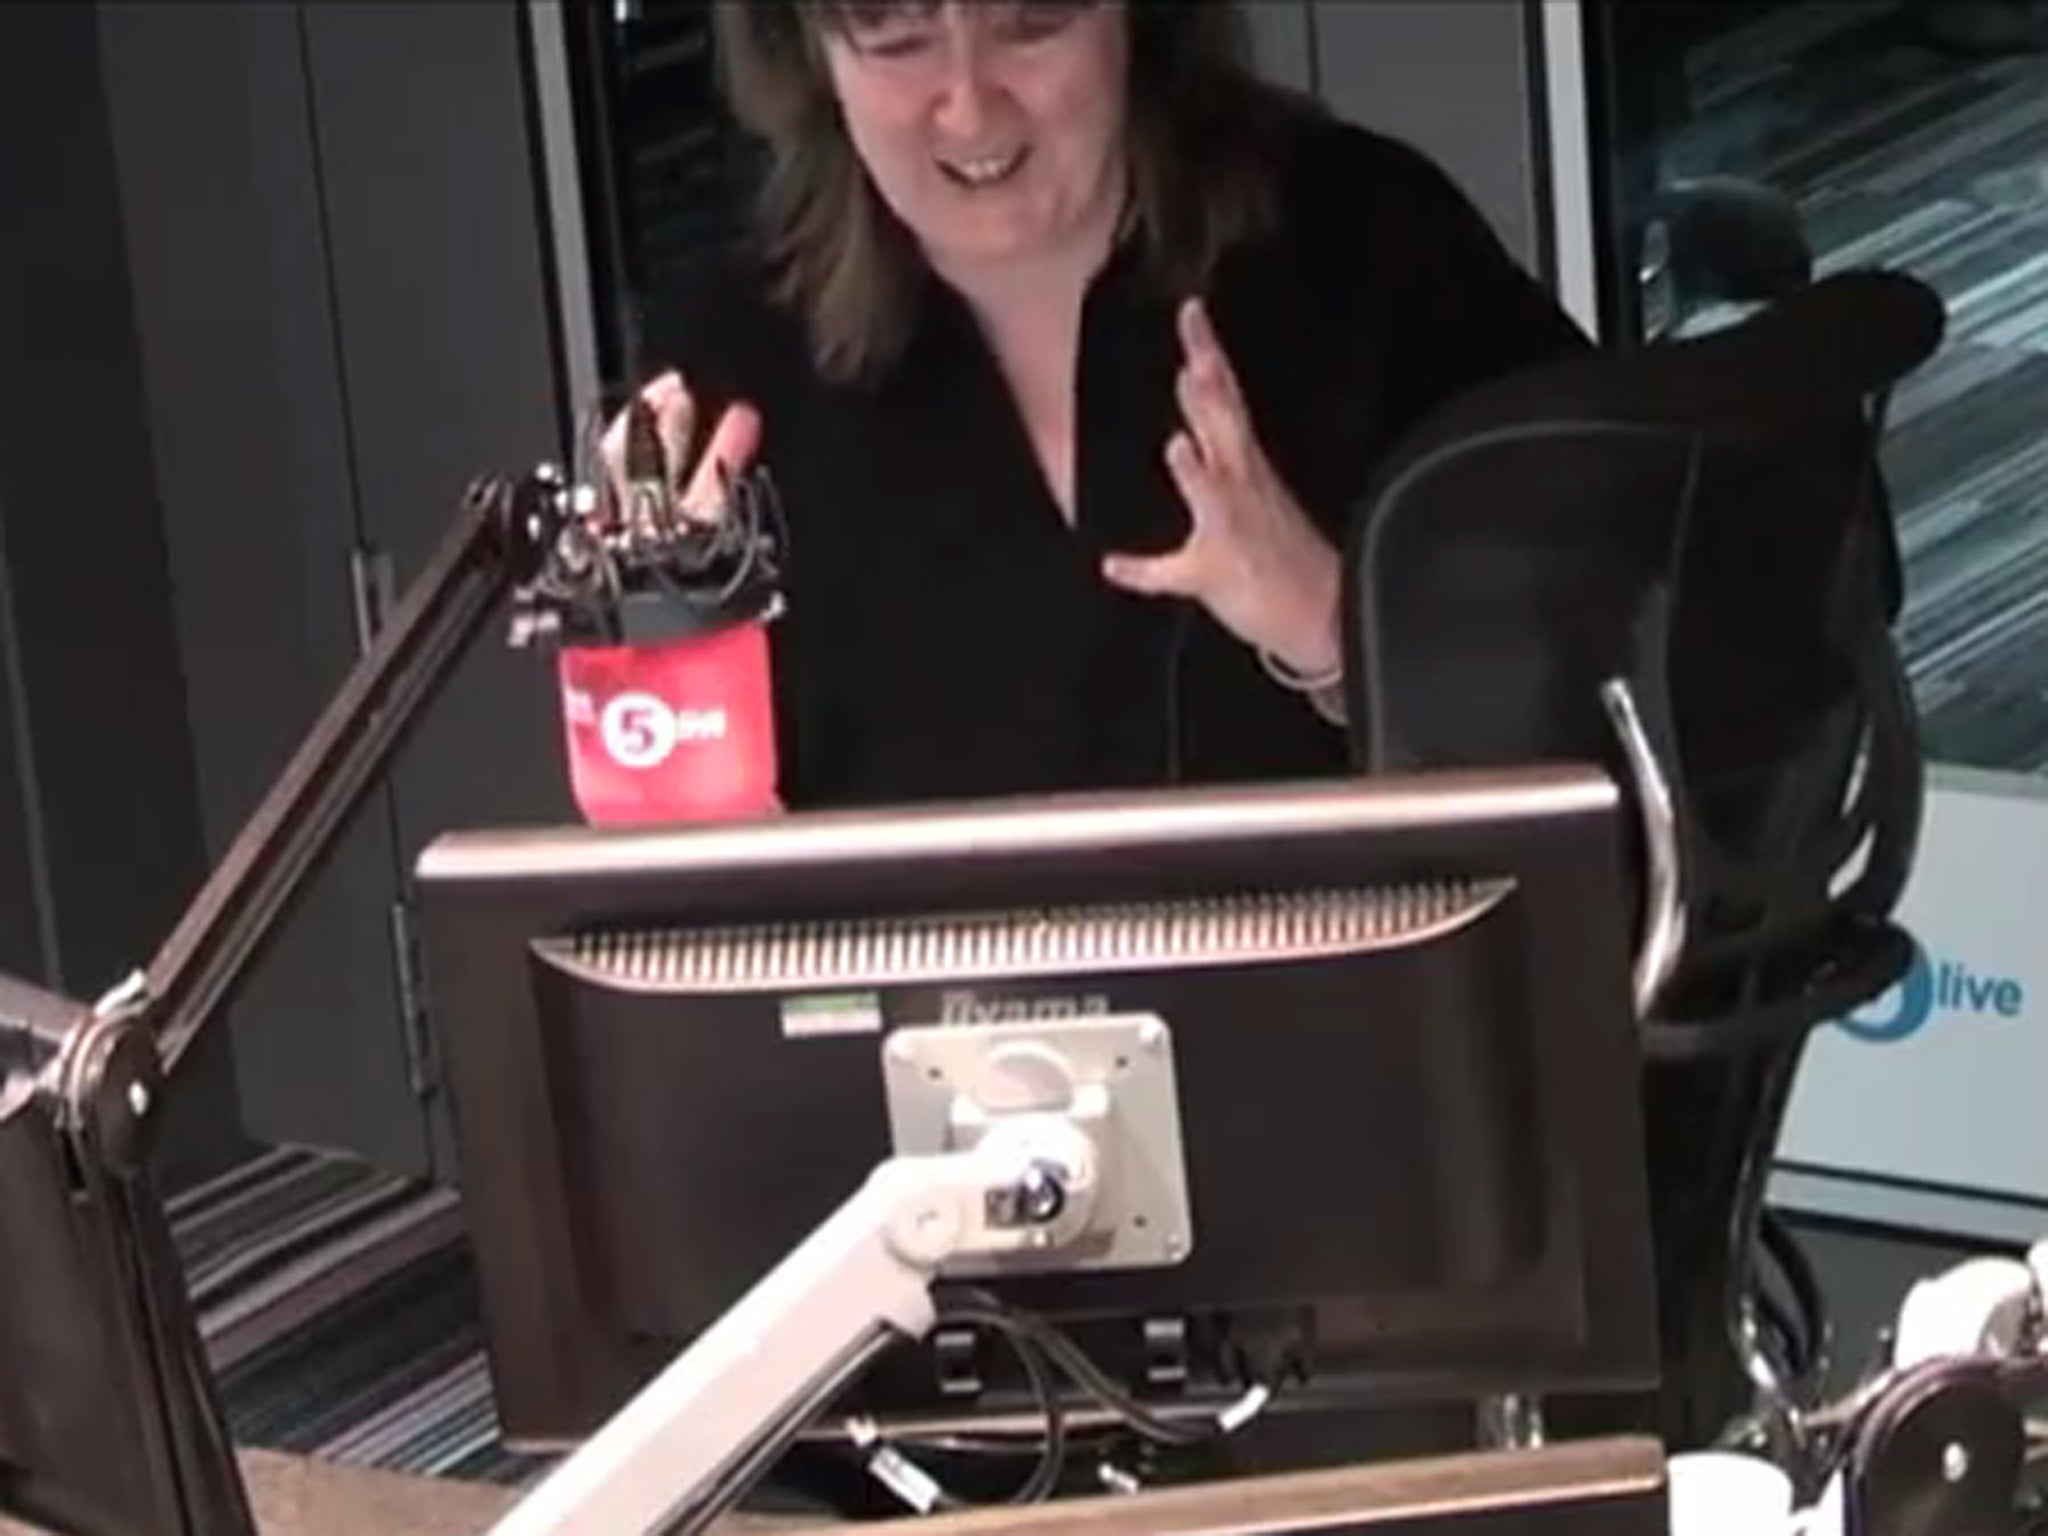 BBC 5Live presenter Shelagh Fogarty gets flustered after a mouse in spotted in the studio